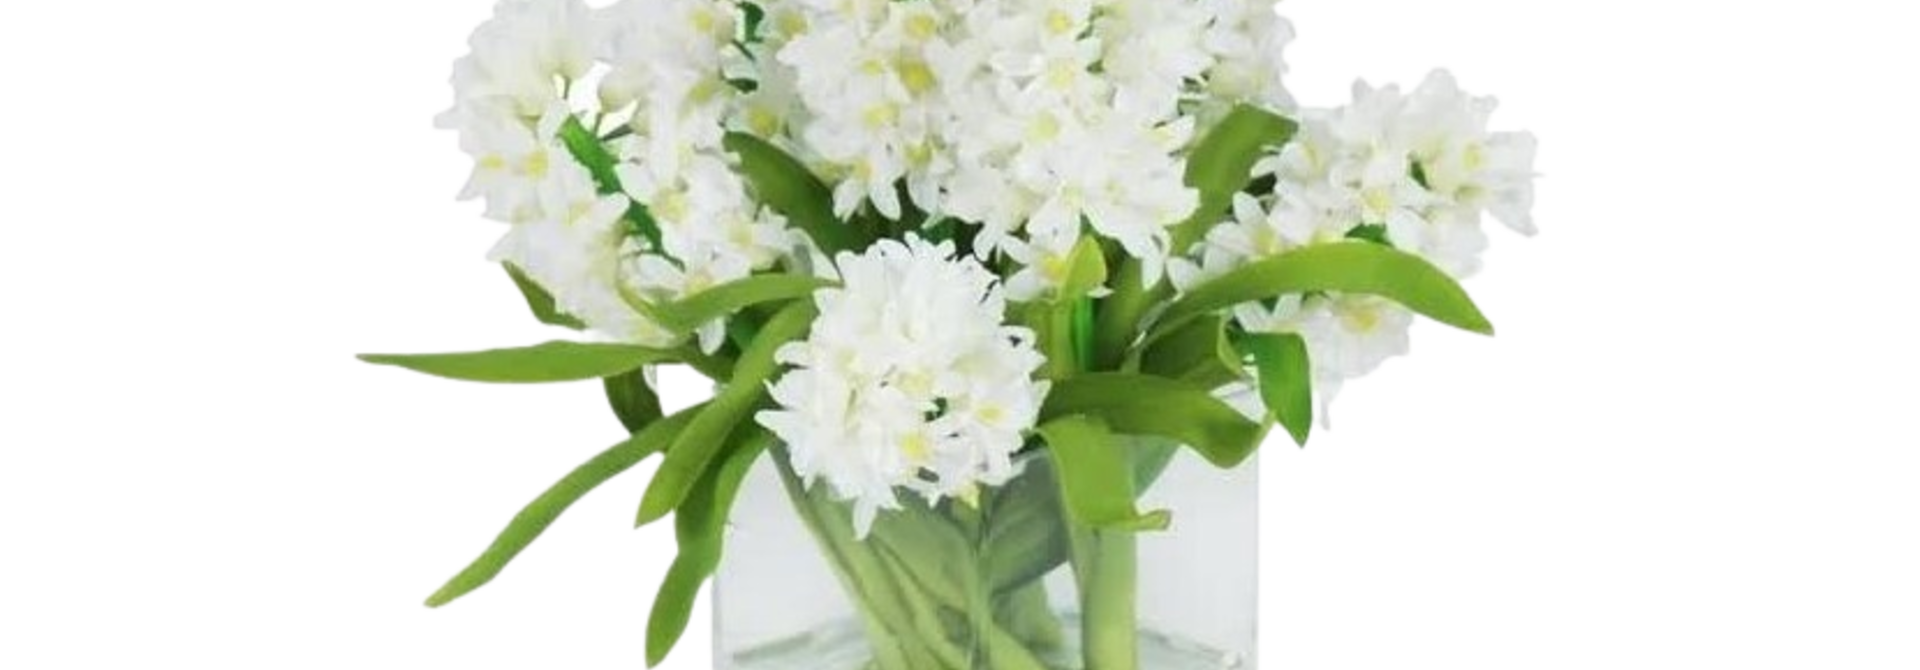 Hyacinth In Square Glass | The Floral Arrangement Collection, White - 12 Inch x 12 Inch x 12 Inch